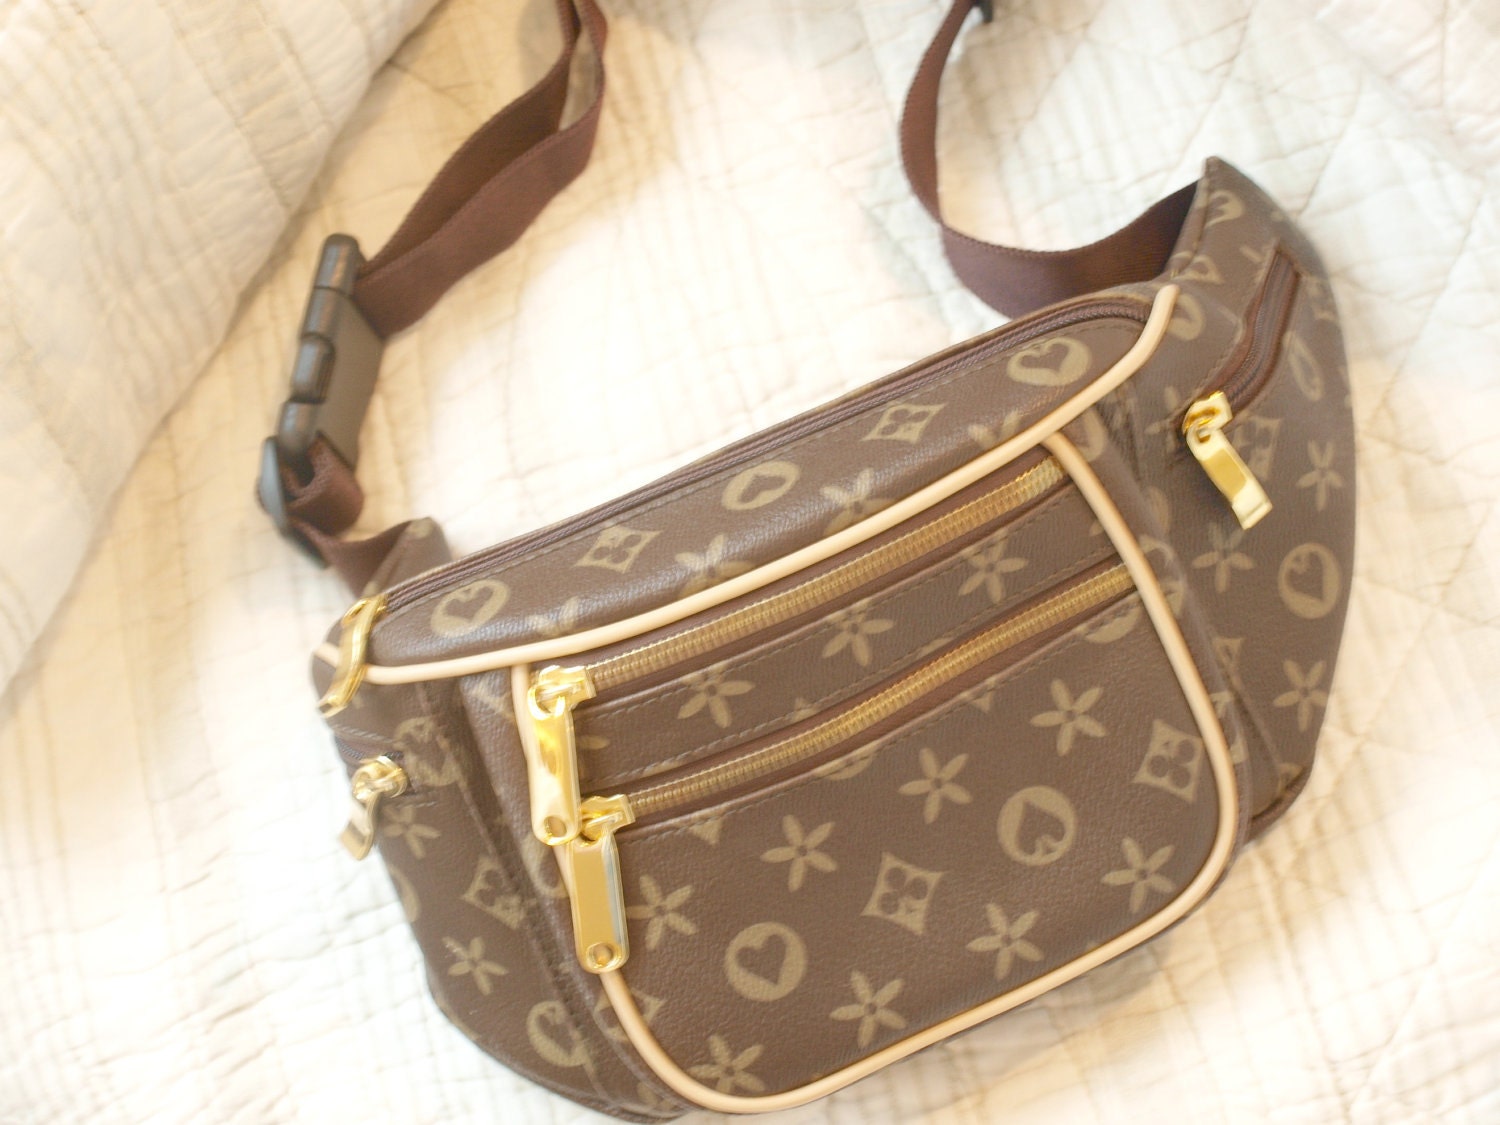 New Price LOUIS VUITTON Replica Fanny Pack...20% by hellolovelyinc